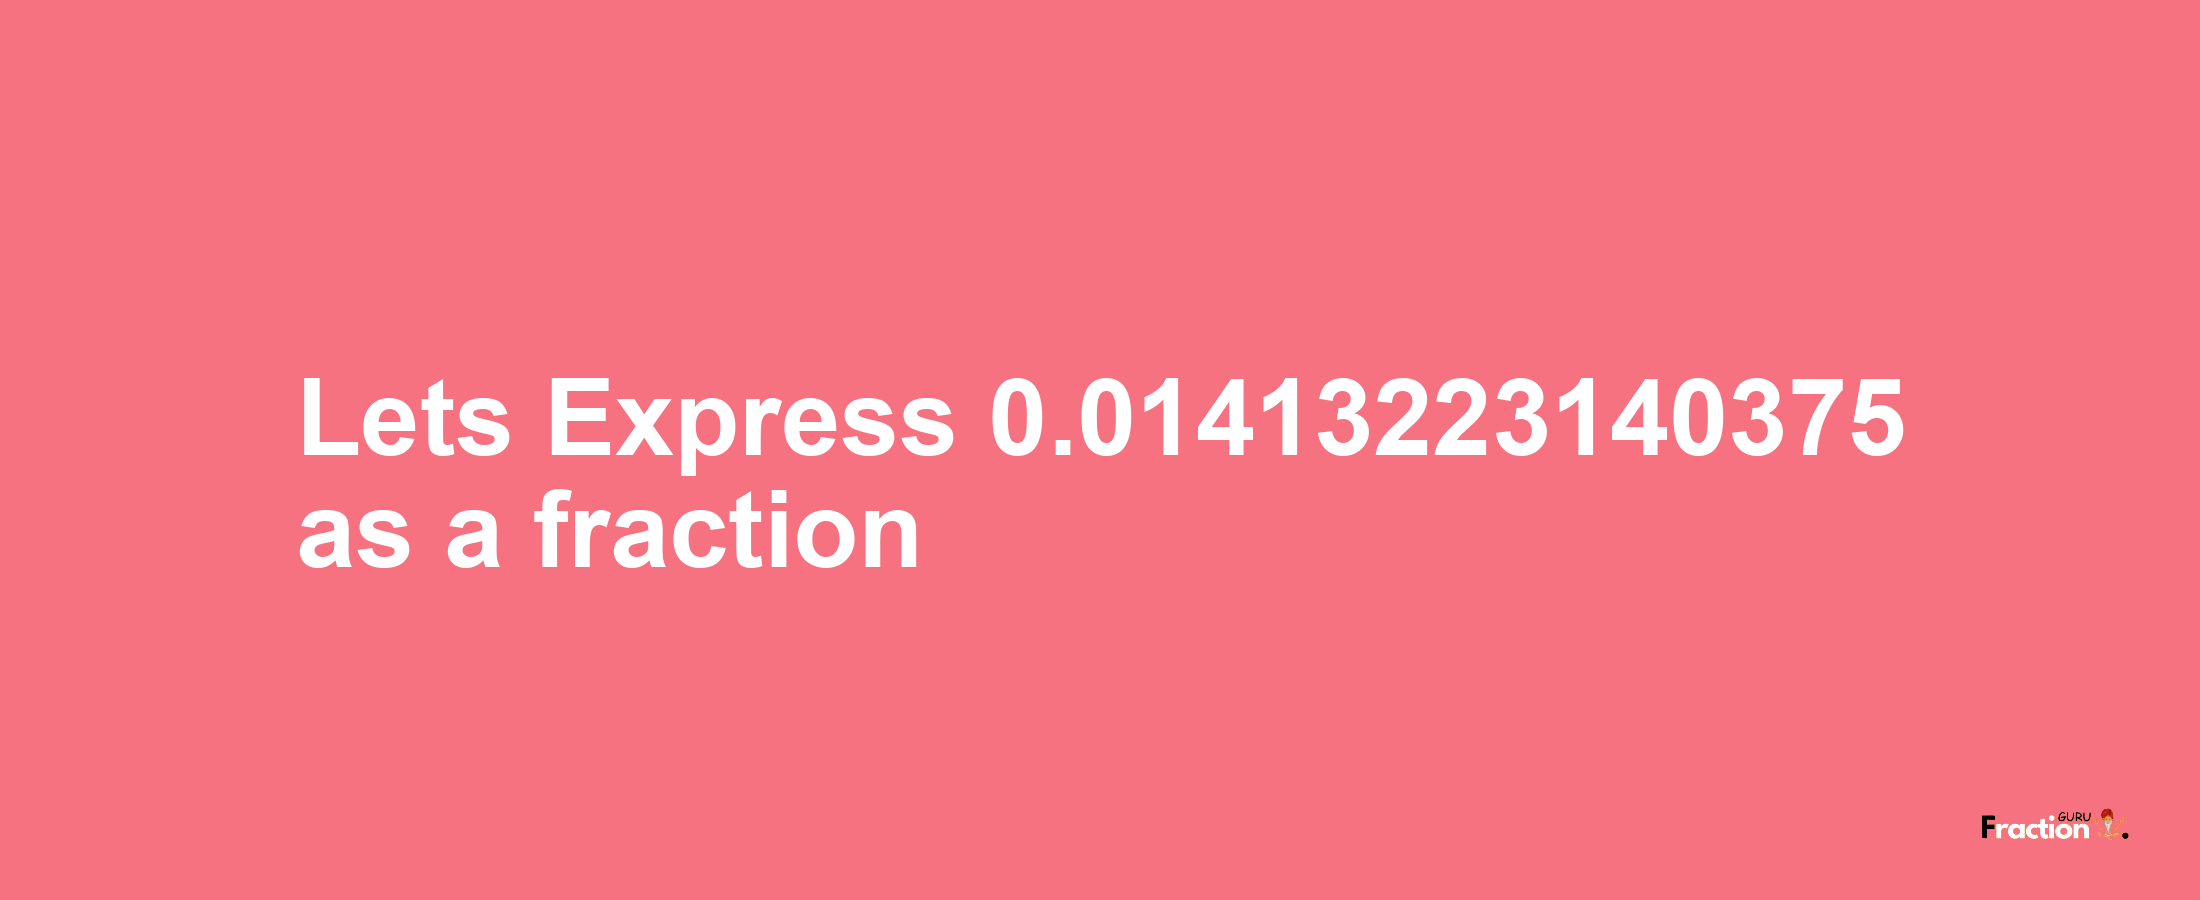 Lets Express 0.01413223140375 as afraction